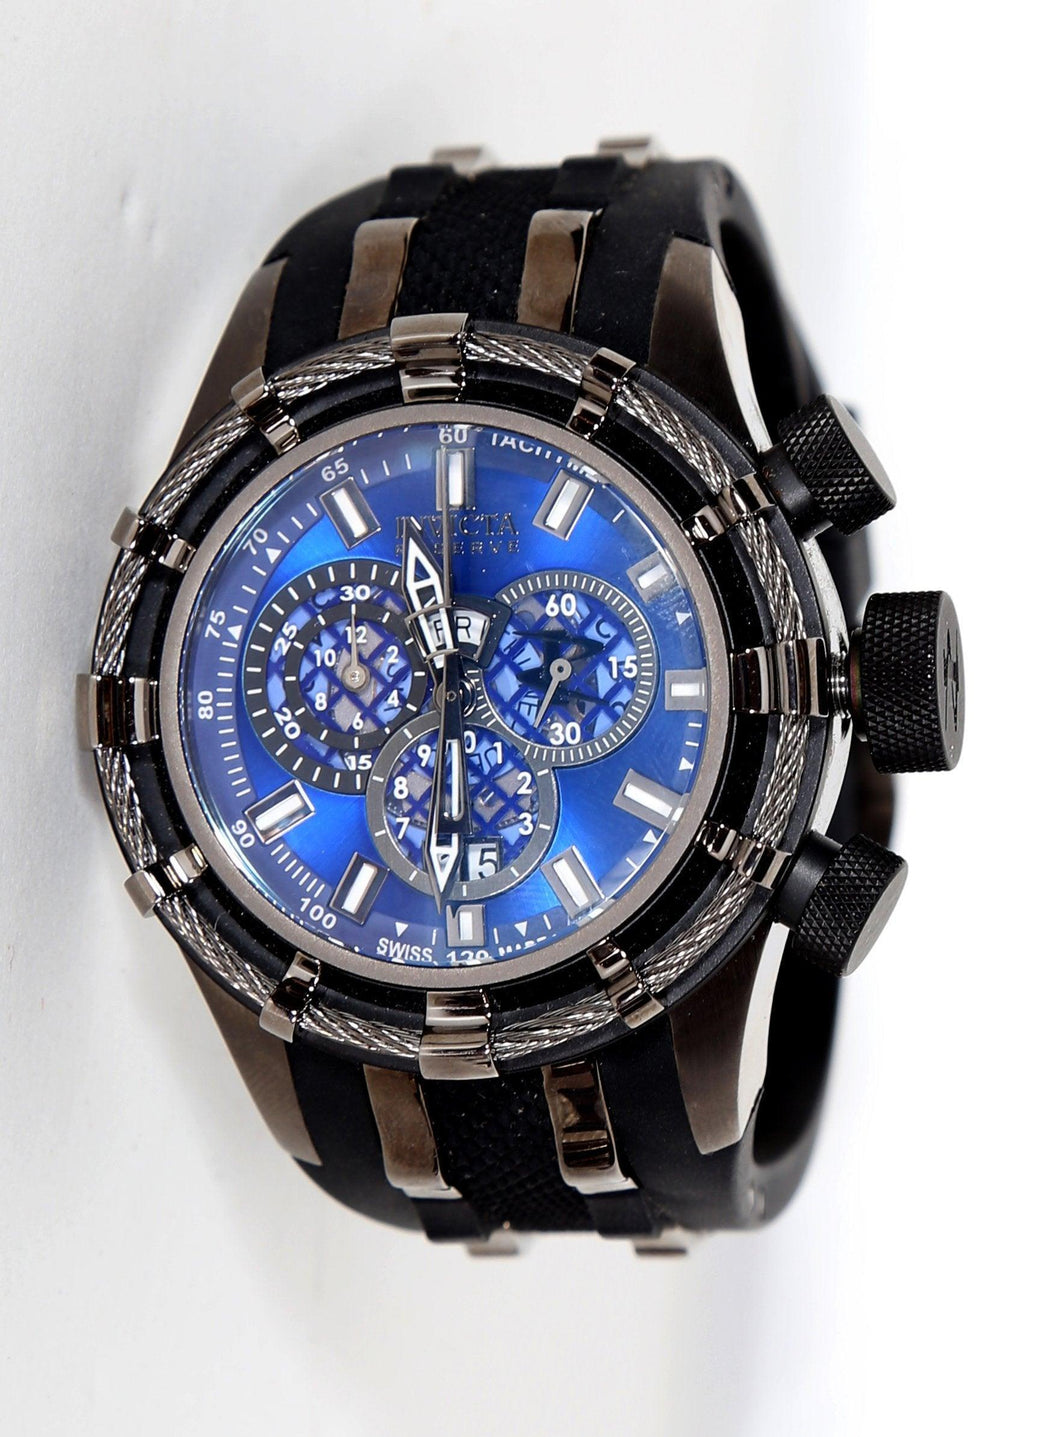 Model no. 10205 Timepiece | Invicta Reserve,{{product.type}}